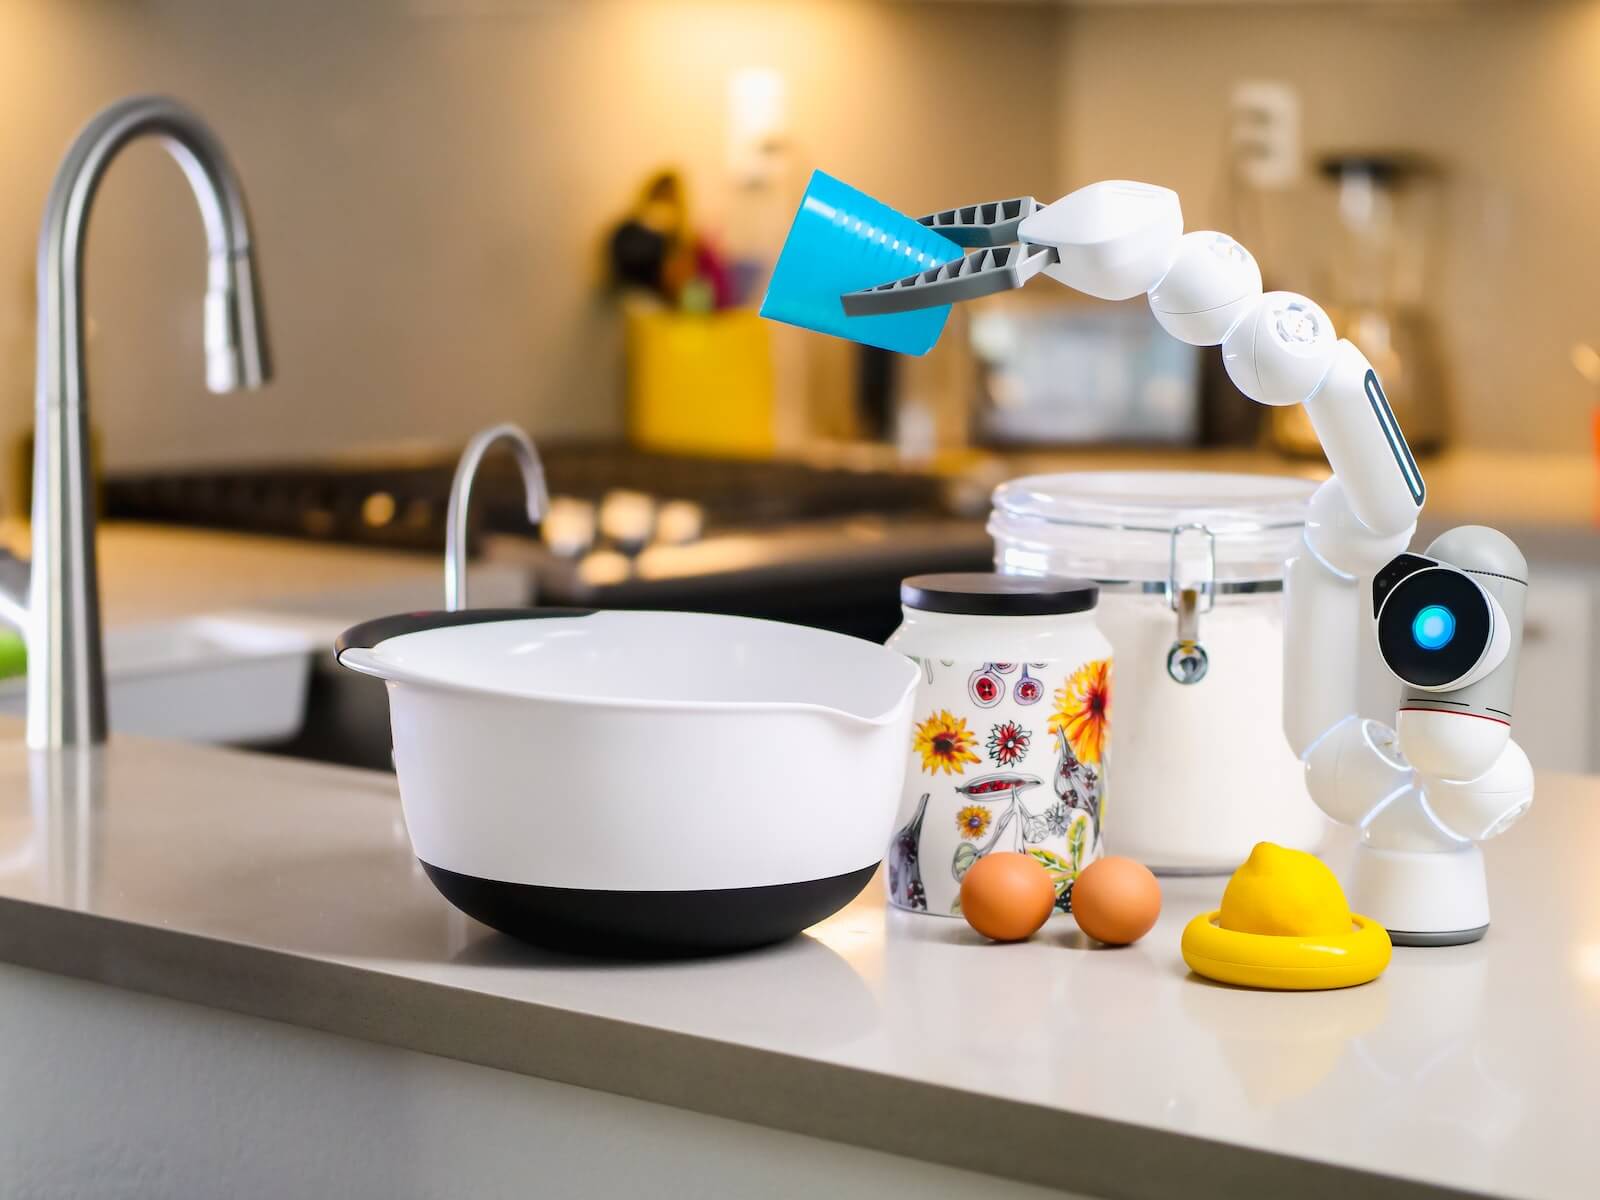 Robot Holding Plastic Cup in Kitchen